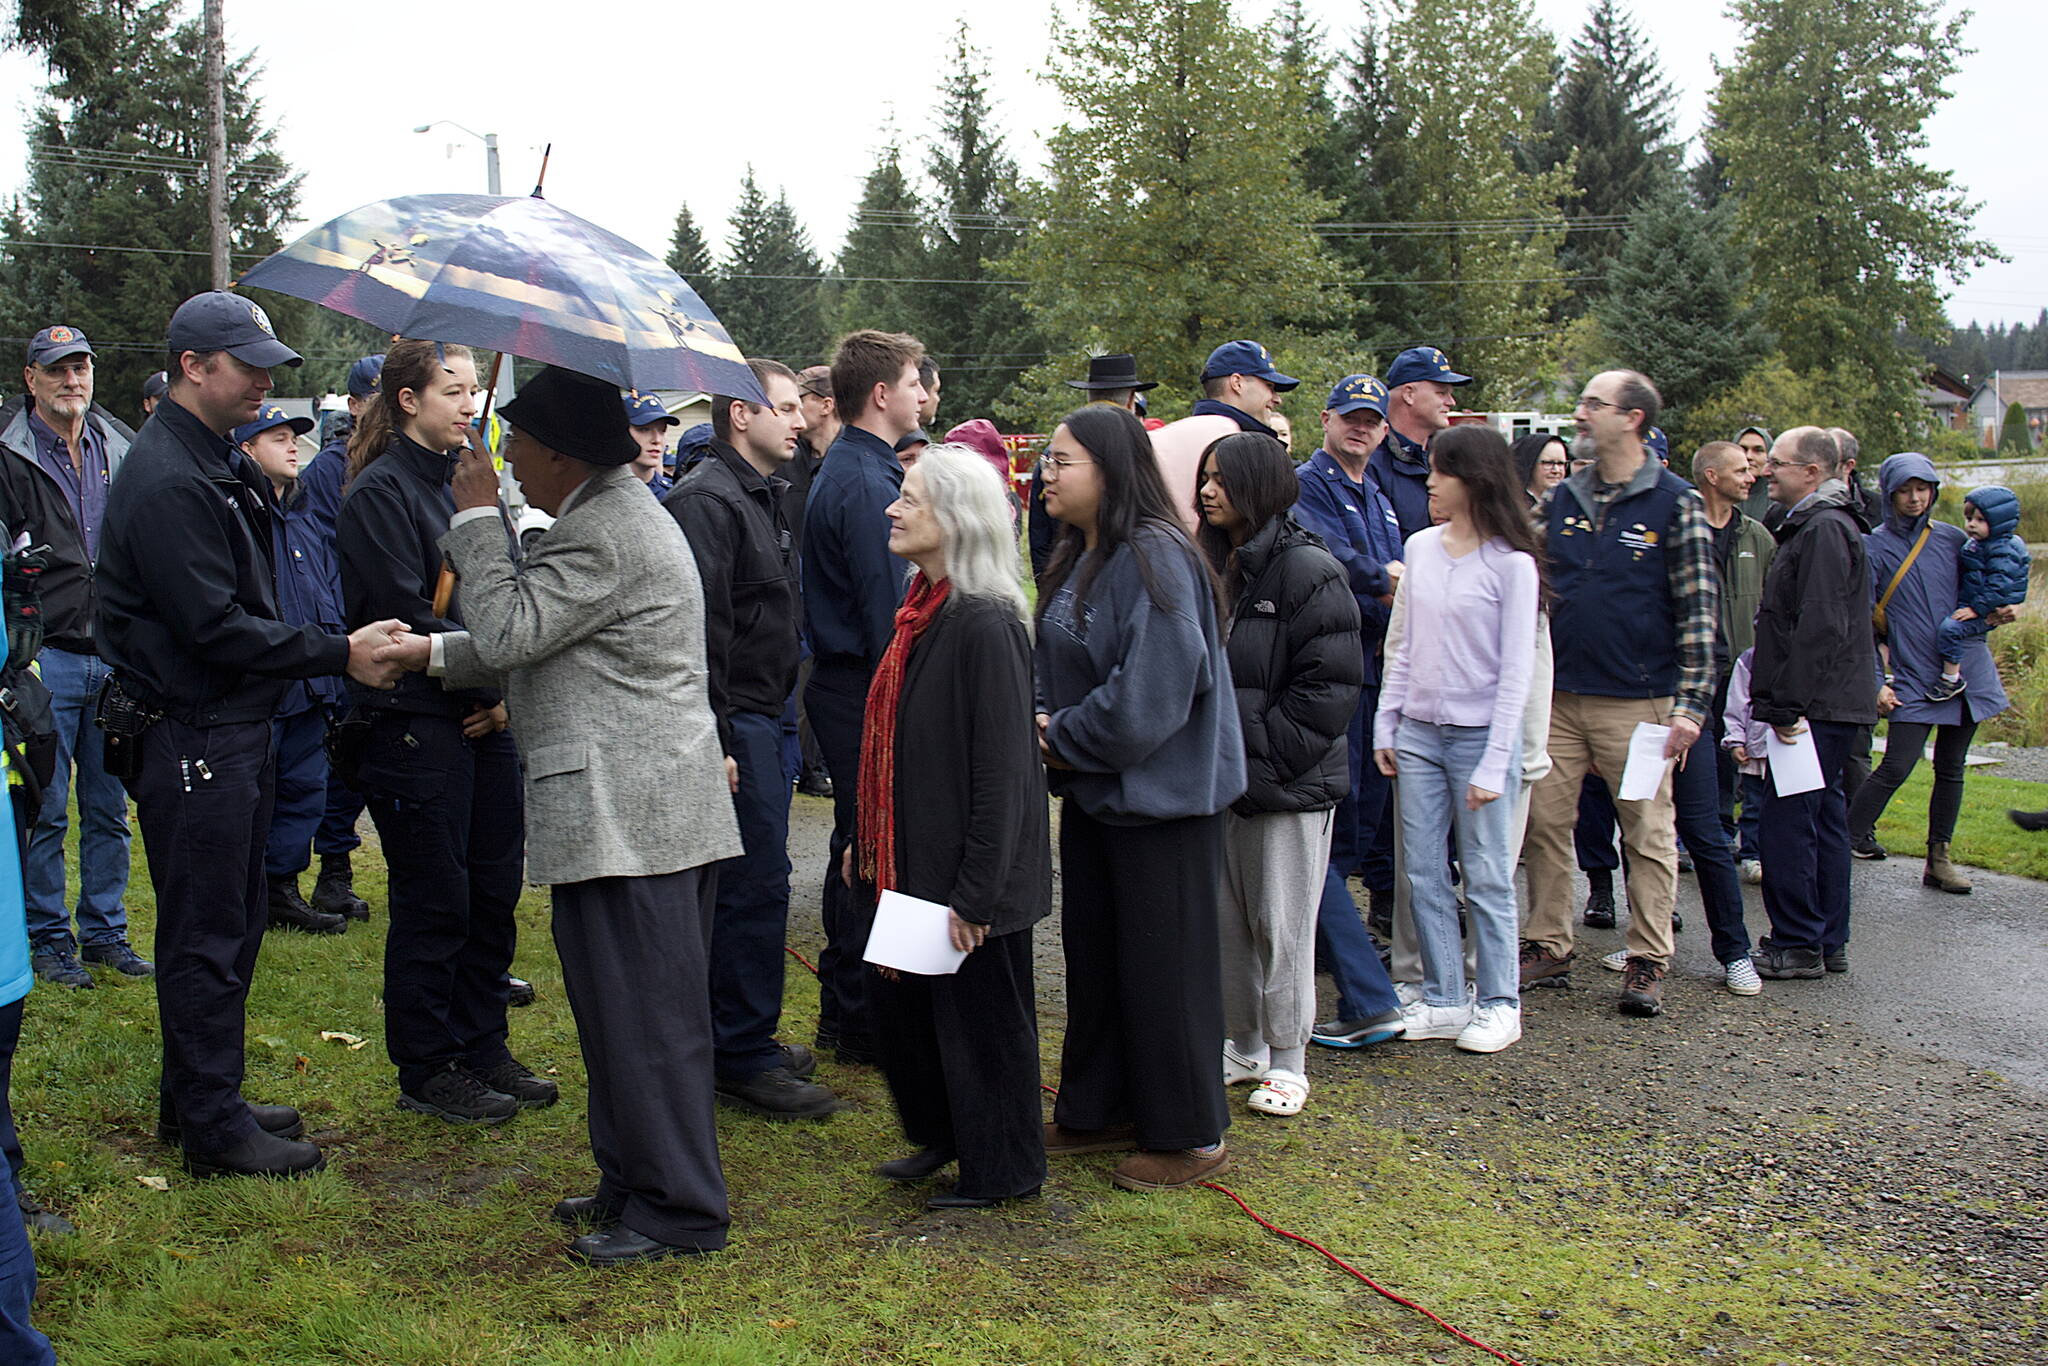 Juneau residents line up to thank local firefighters for their service during a ceremony Monday at the September 11th Memorial at Riverside Rotary Park commemorating the terrorist attacks on that date in 2001. (Mark Sabbatini / Juneau Empire)